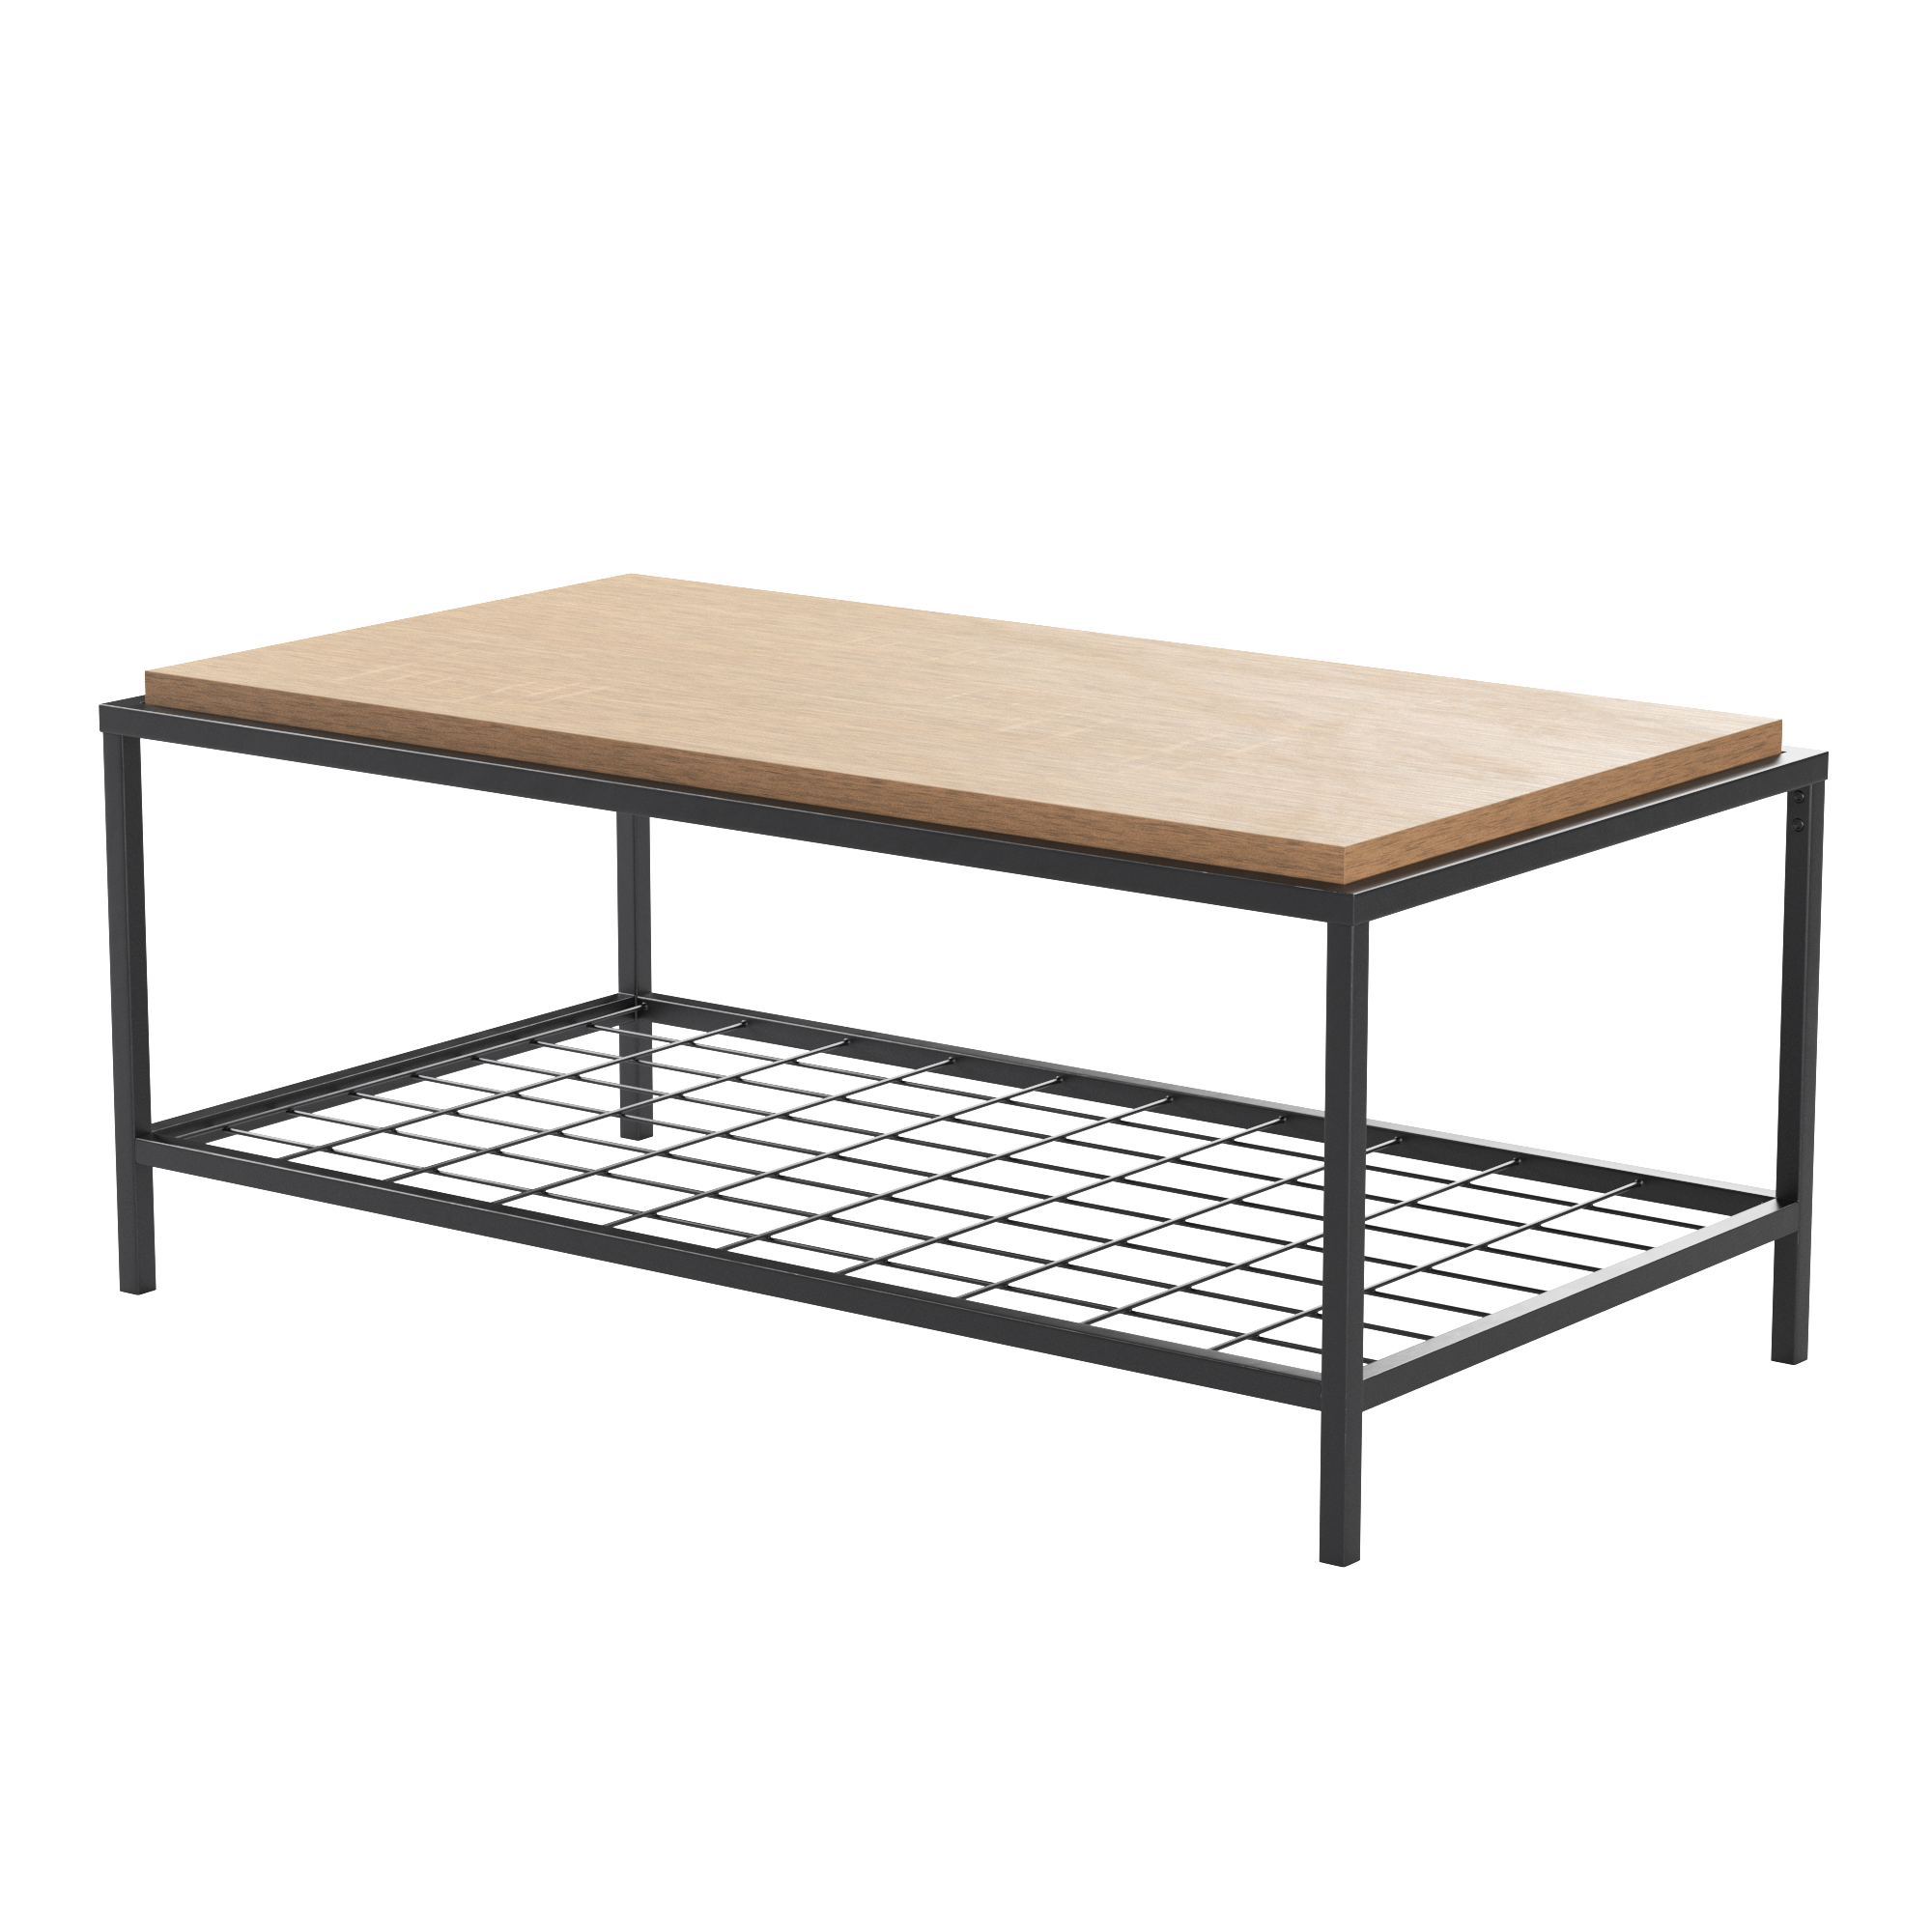 Mayview Collis Industrial Rectangle Wood and Metal Coffee Table, Oak - image 10 of 11